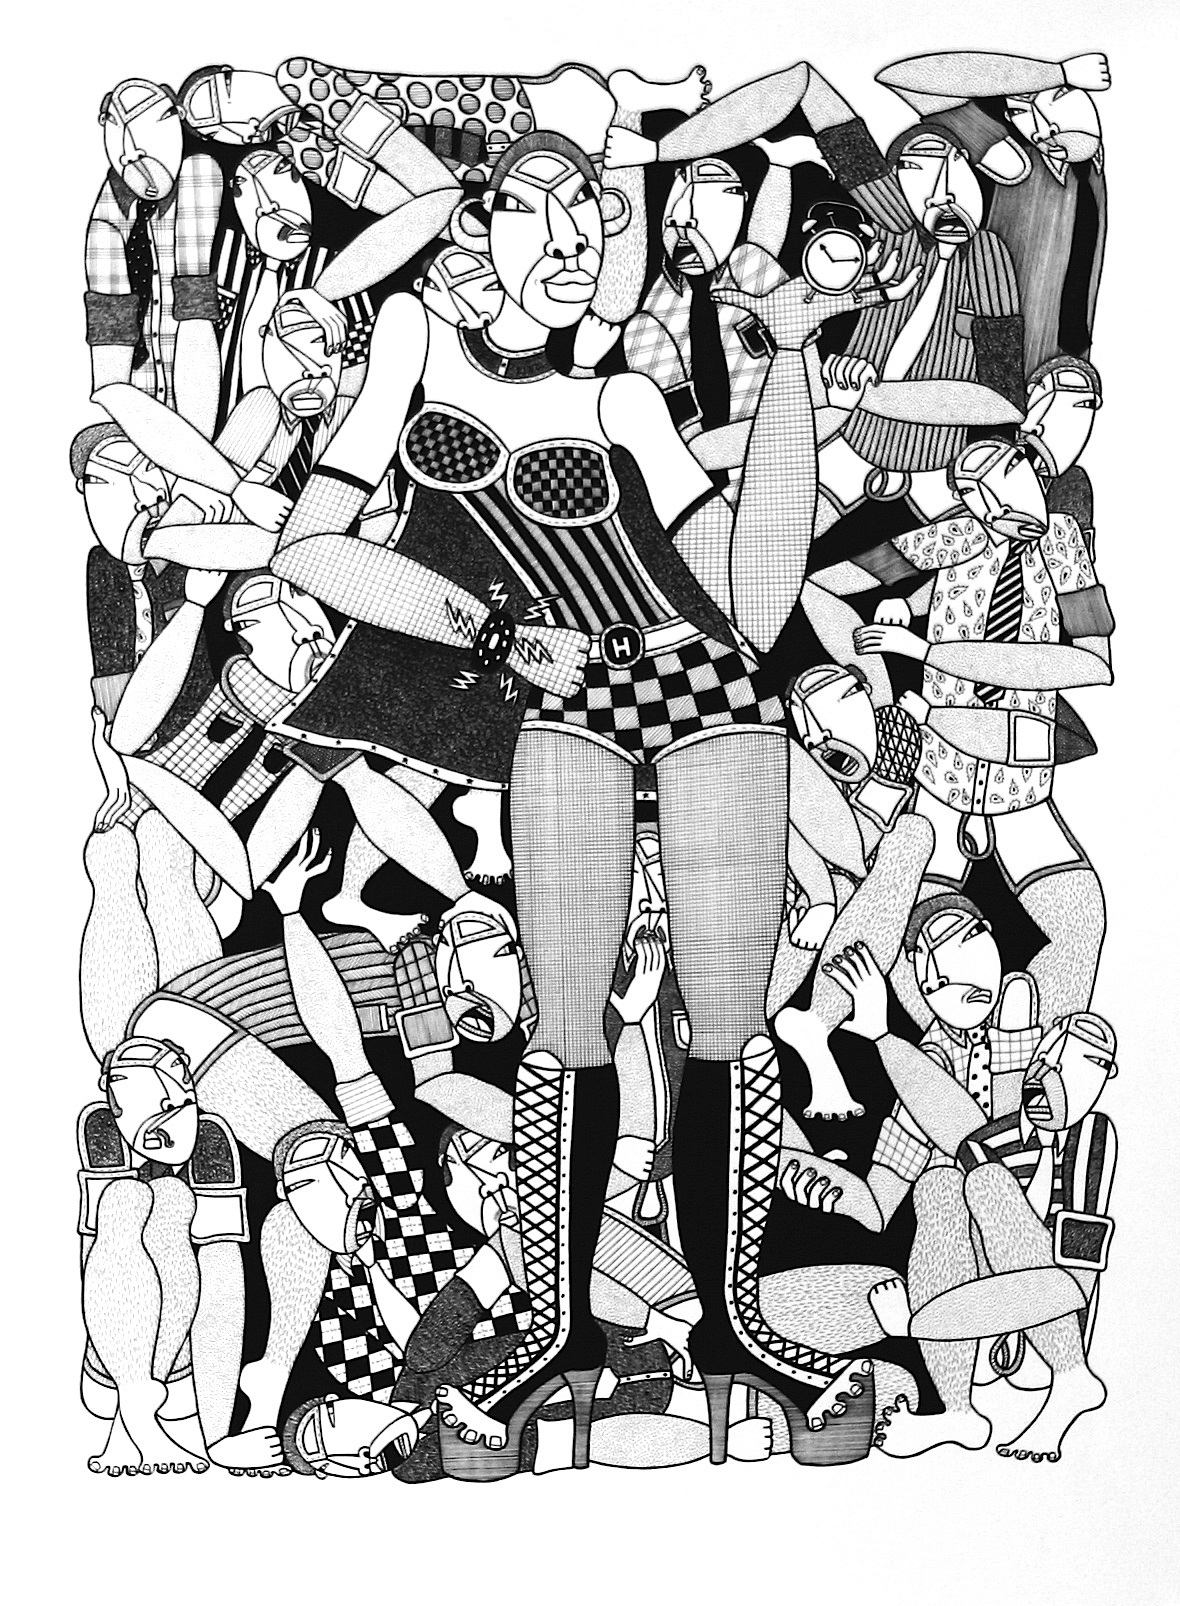 Hildegard, ink on paper, 22" x 30", 2010, private collection